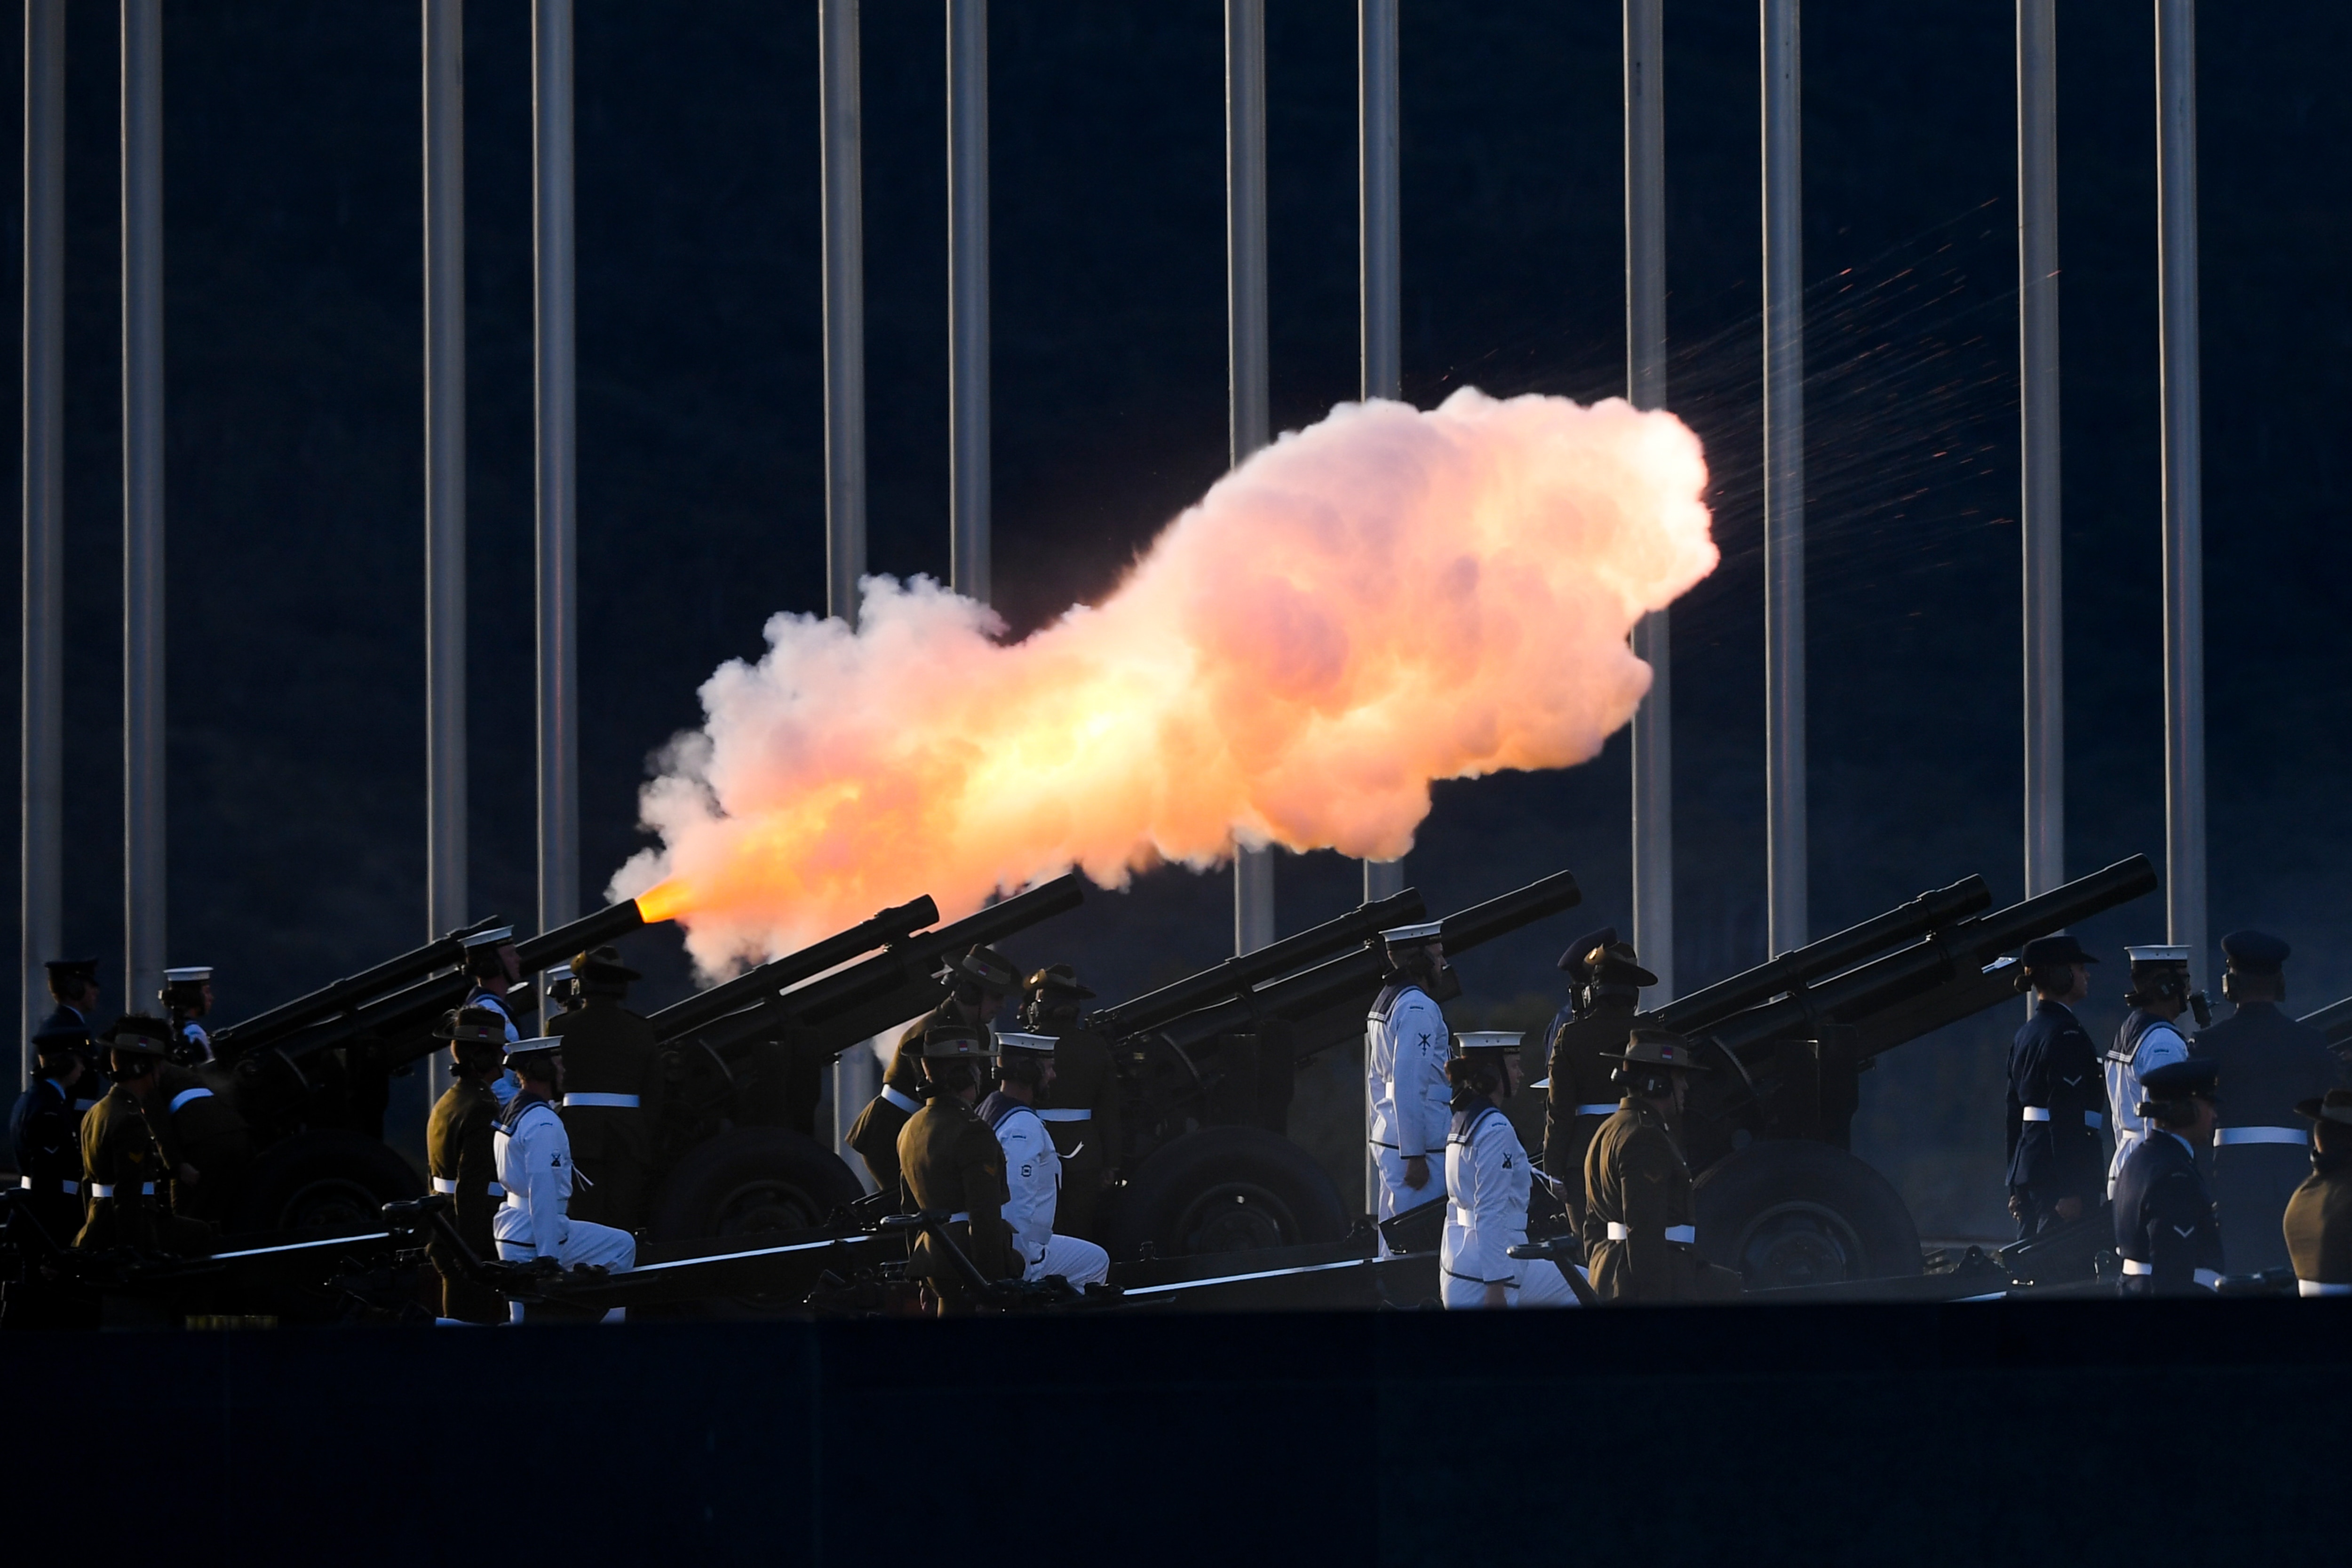 A 41-gun salute is fired to commemorate the death of Prince Philip, the Duke of Edinburgh, at Parliament House in Canberra, Saturday, 10 April, 2021. 